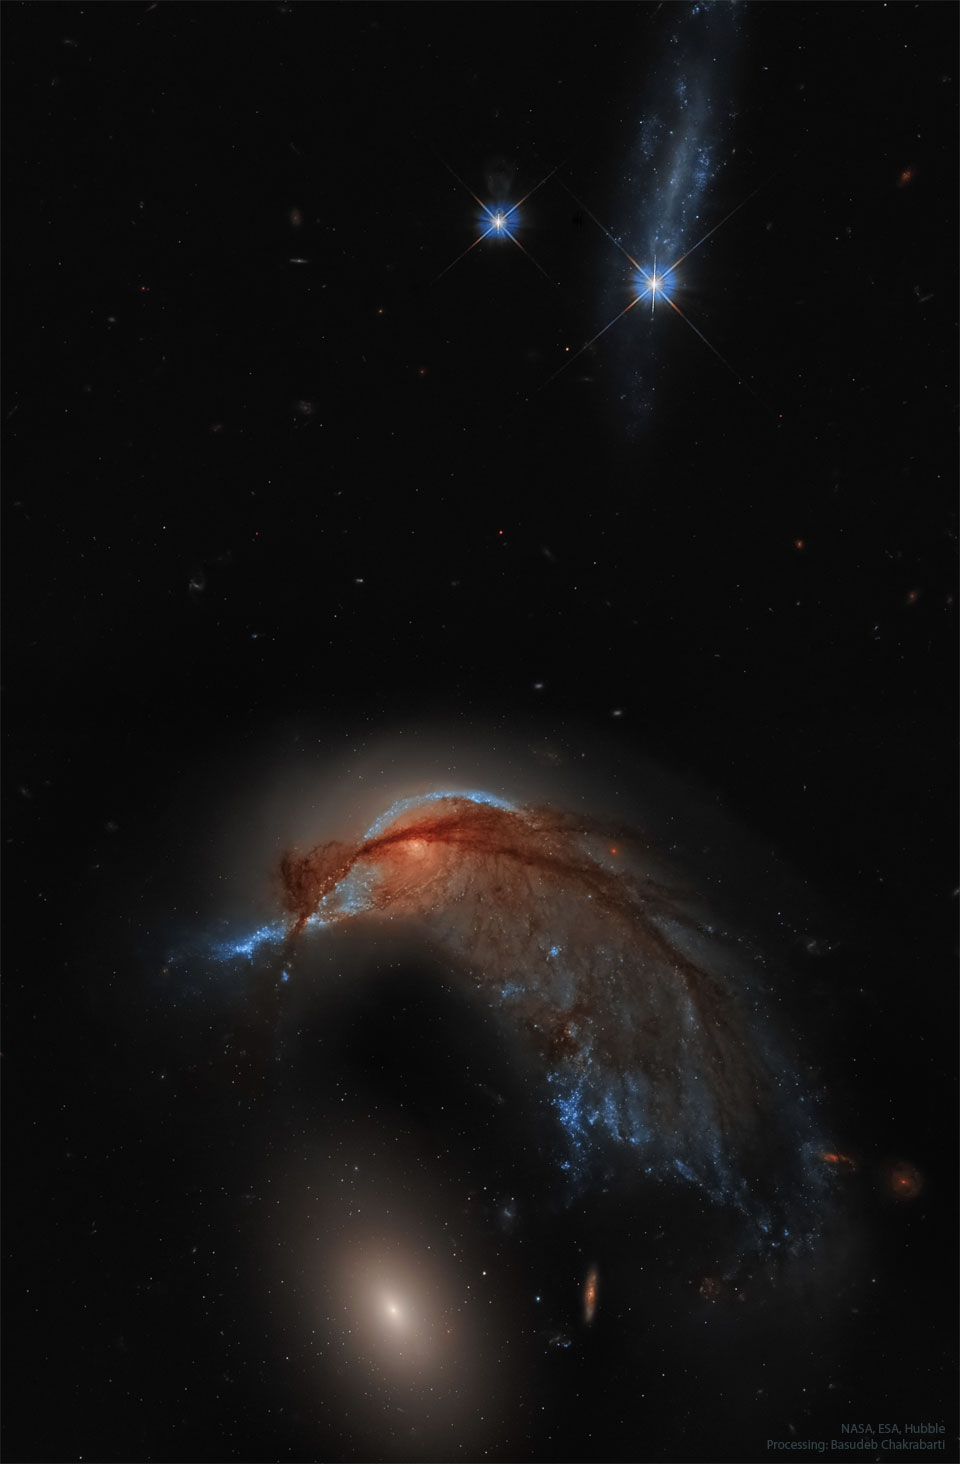 A starfield with two bright stars at the top of the frame
and two galaxies at the bottom. The upper galaxy is a spiral
galaxy and has an appearance reminiscent of a hummingbird. The lower
galaxy is a featureless elliptical galaxy.  
Please see the explanation for more detailed information.